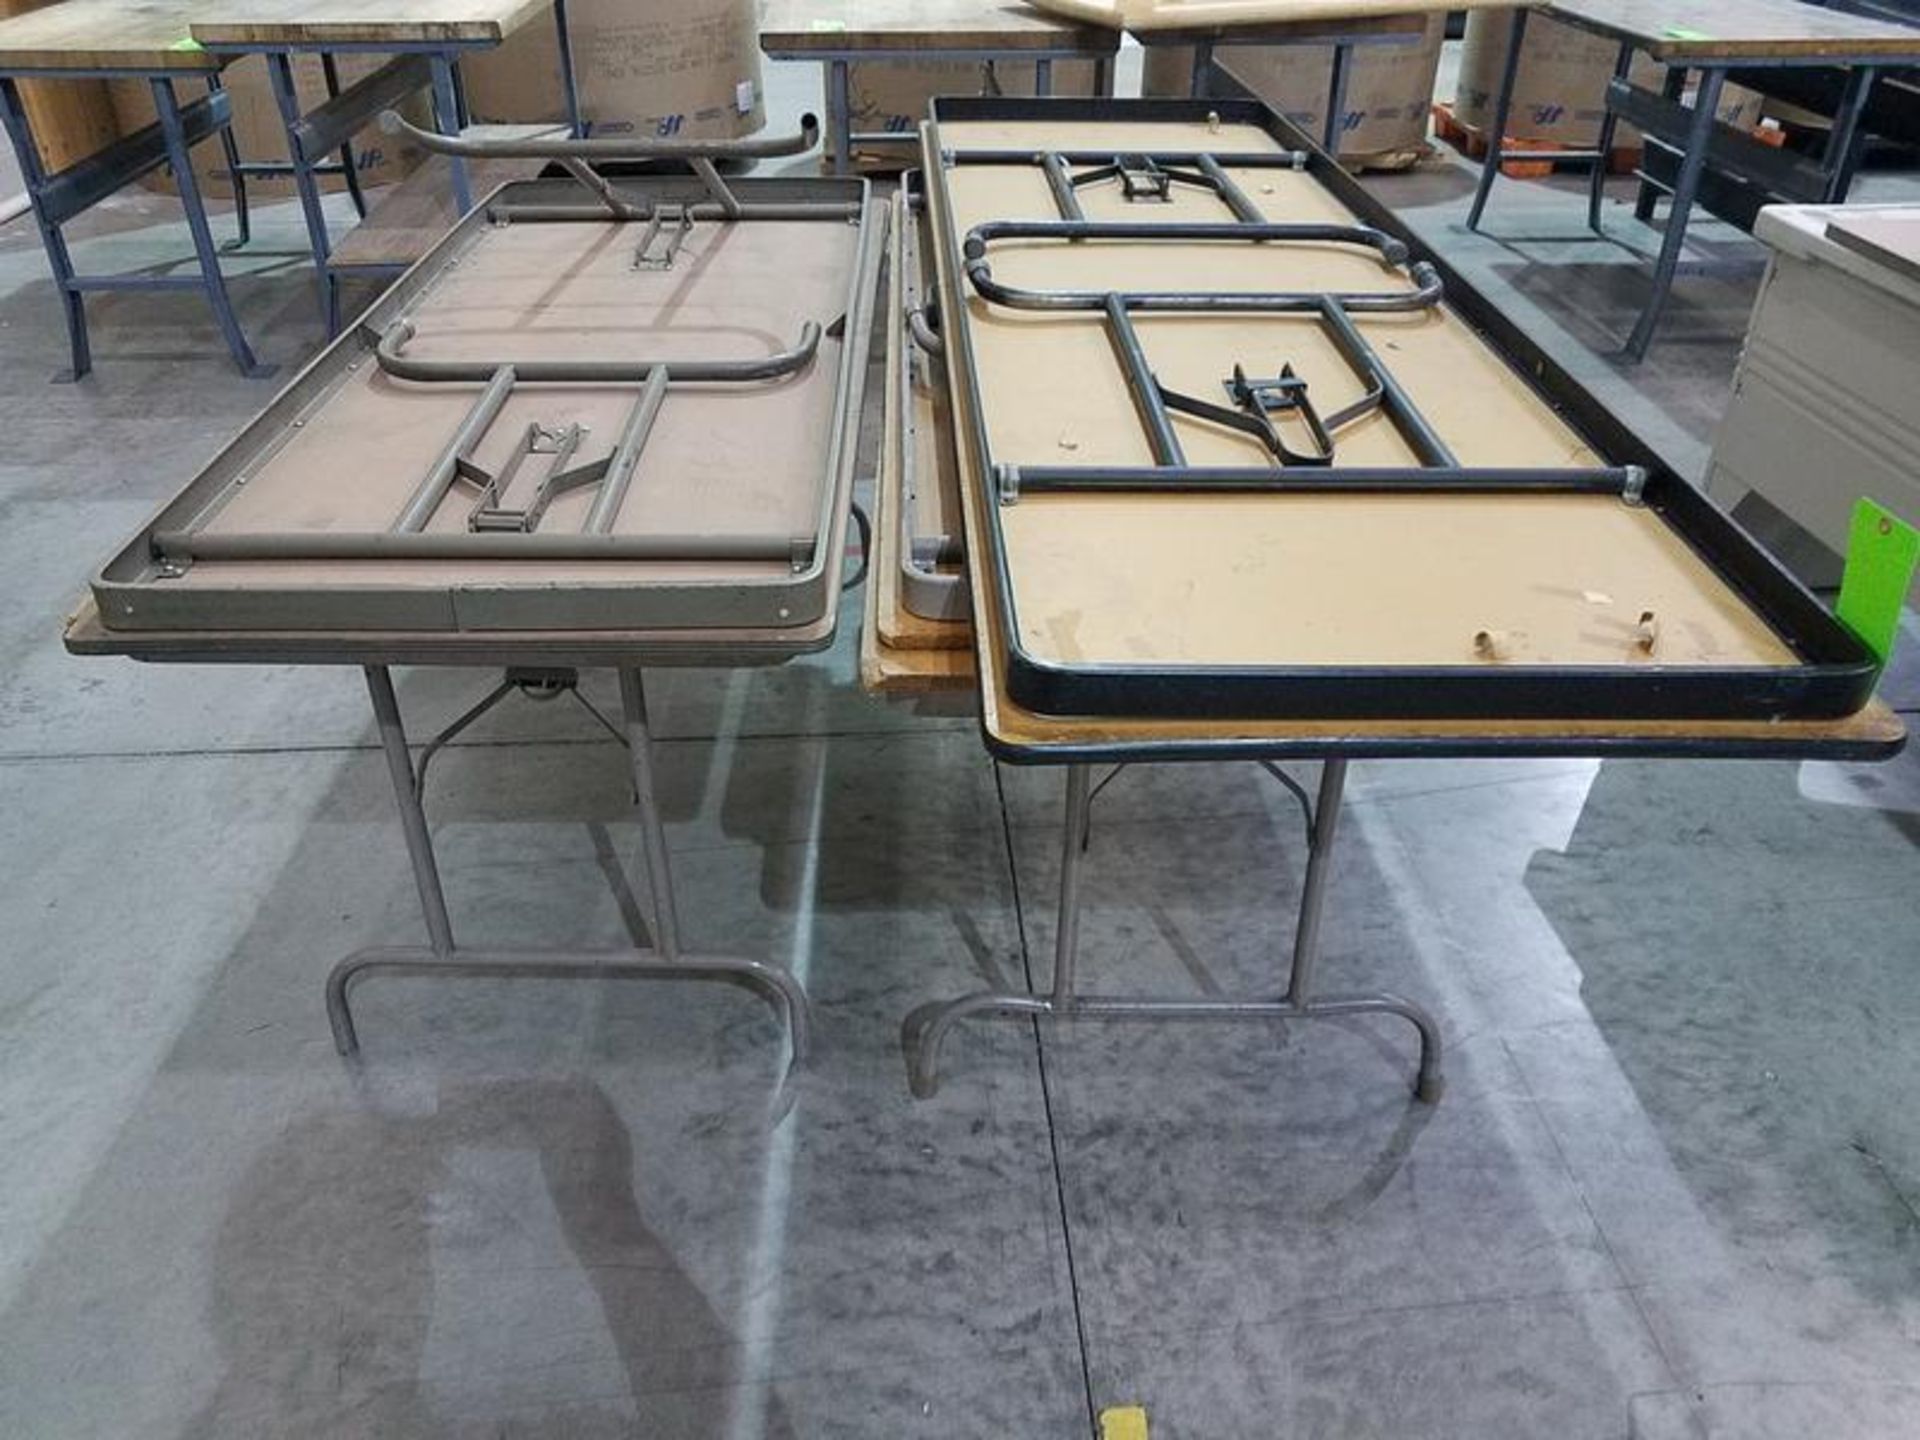 Lot of (5) Assorted Folding Tables